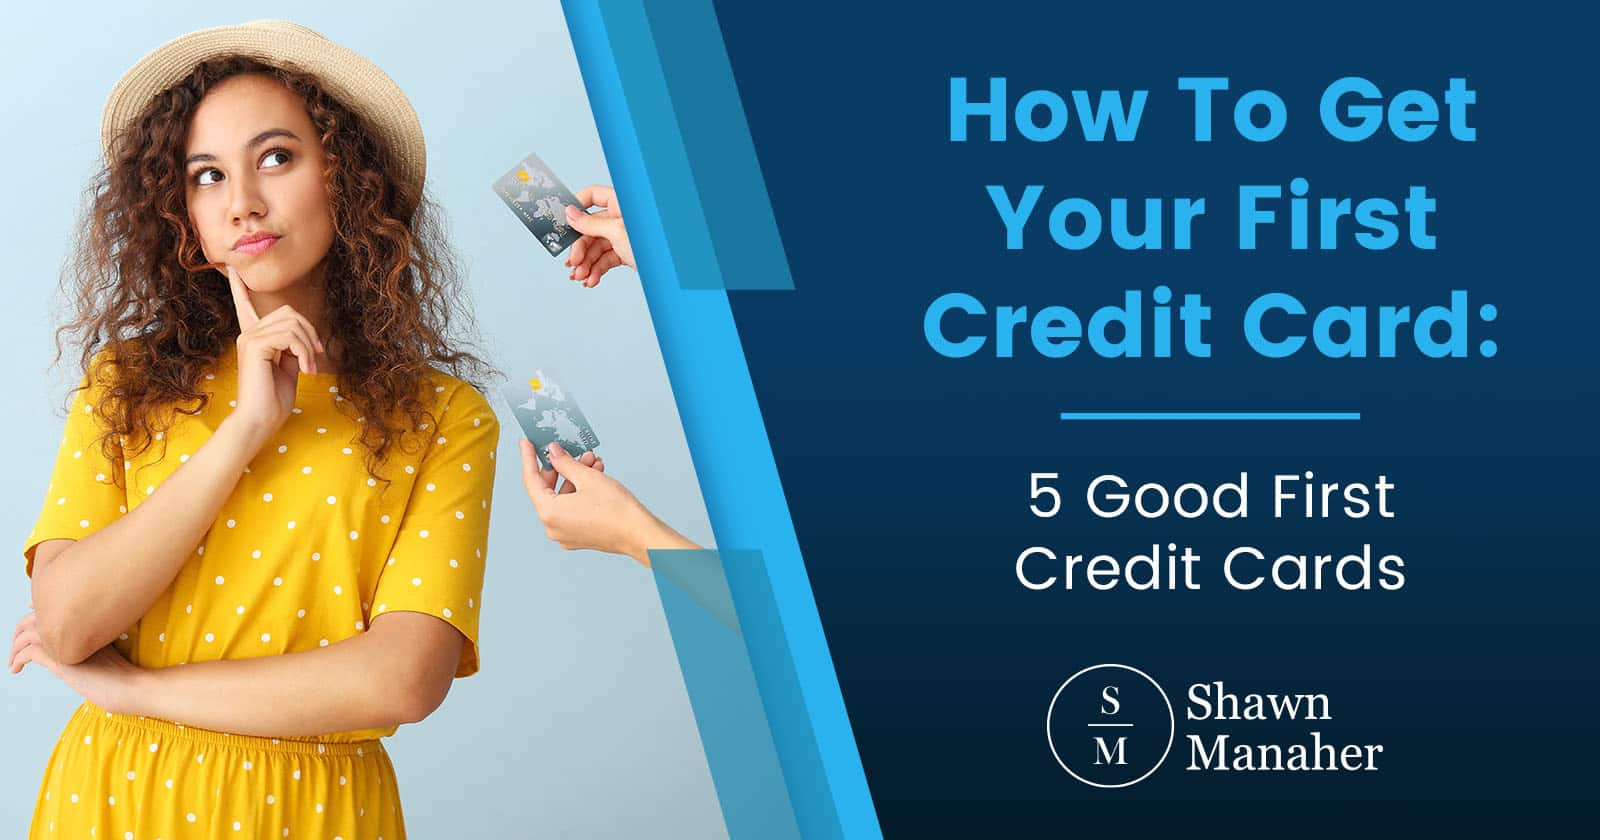 How To Get Your First Credit Card: 5 Good First Credit Cards